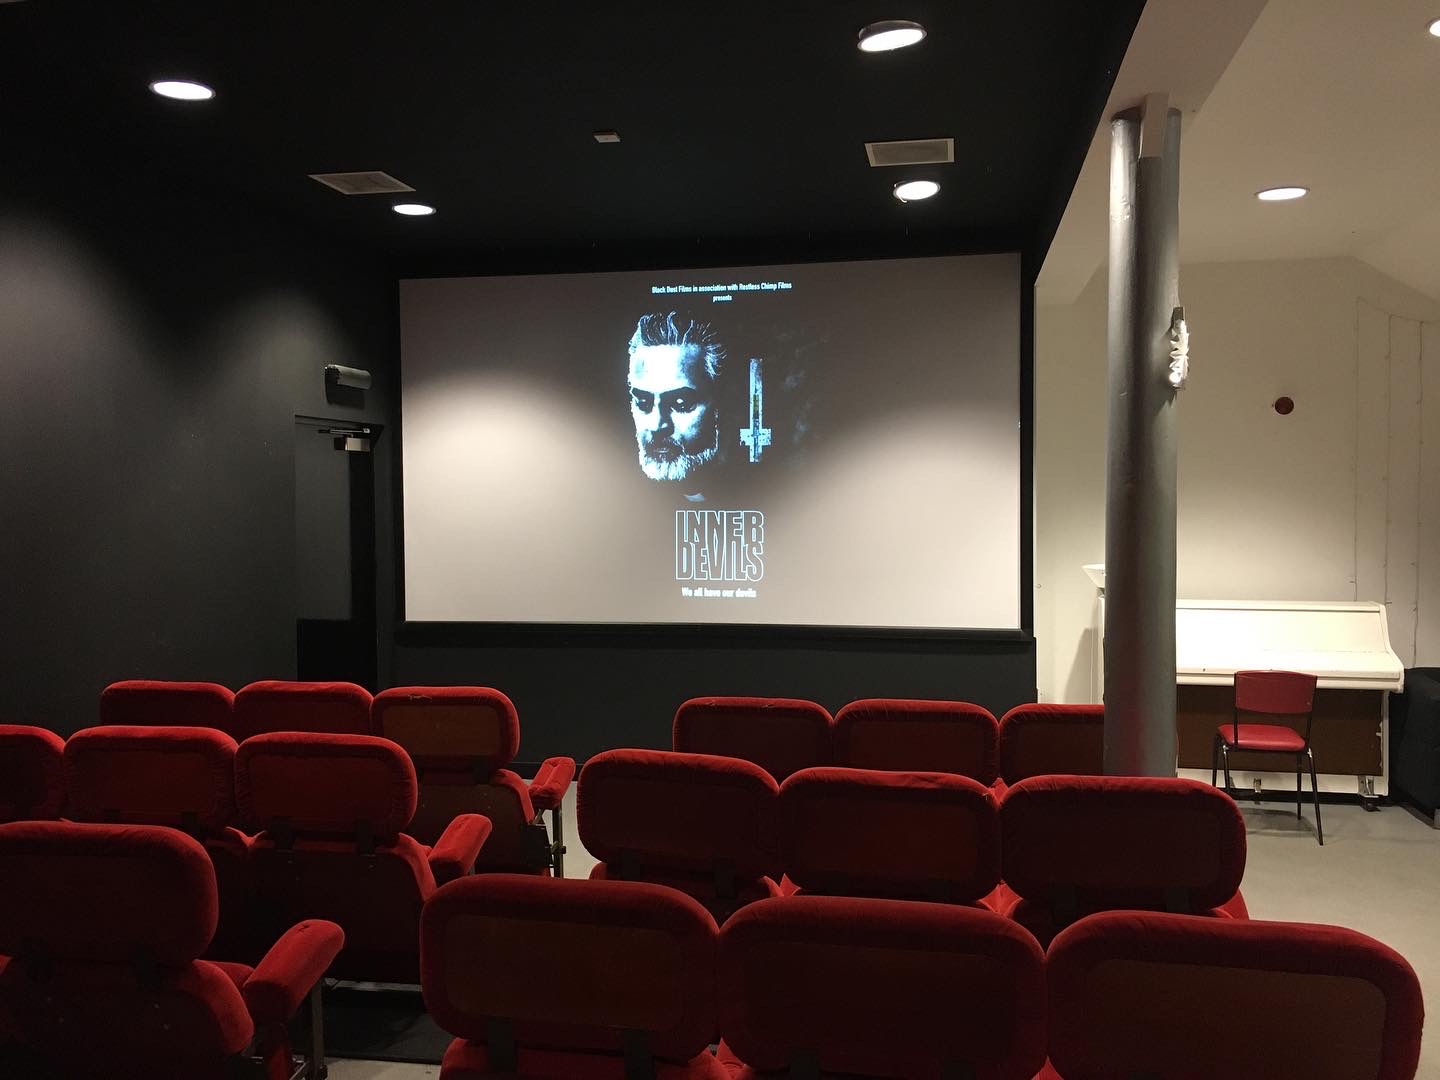 An empty film screening room with a poster of 'Inner Devils' displayed on the screen.